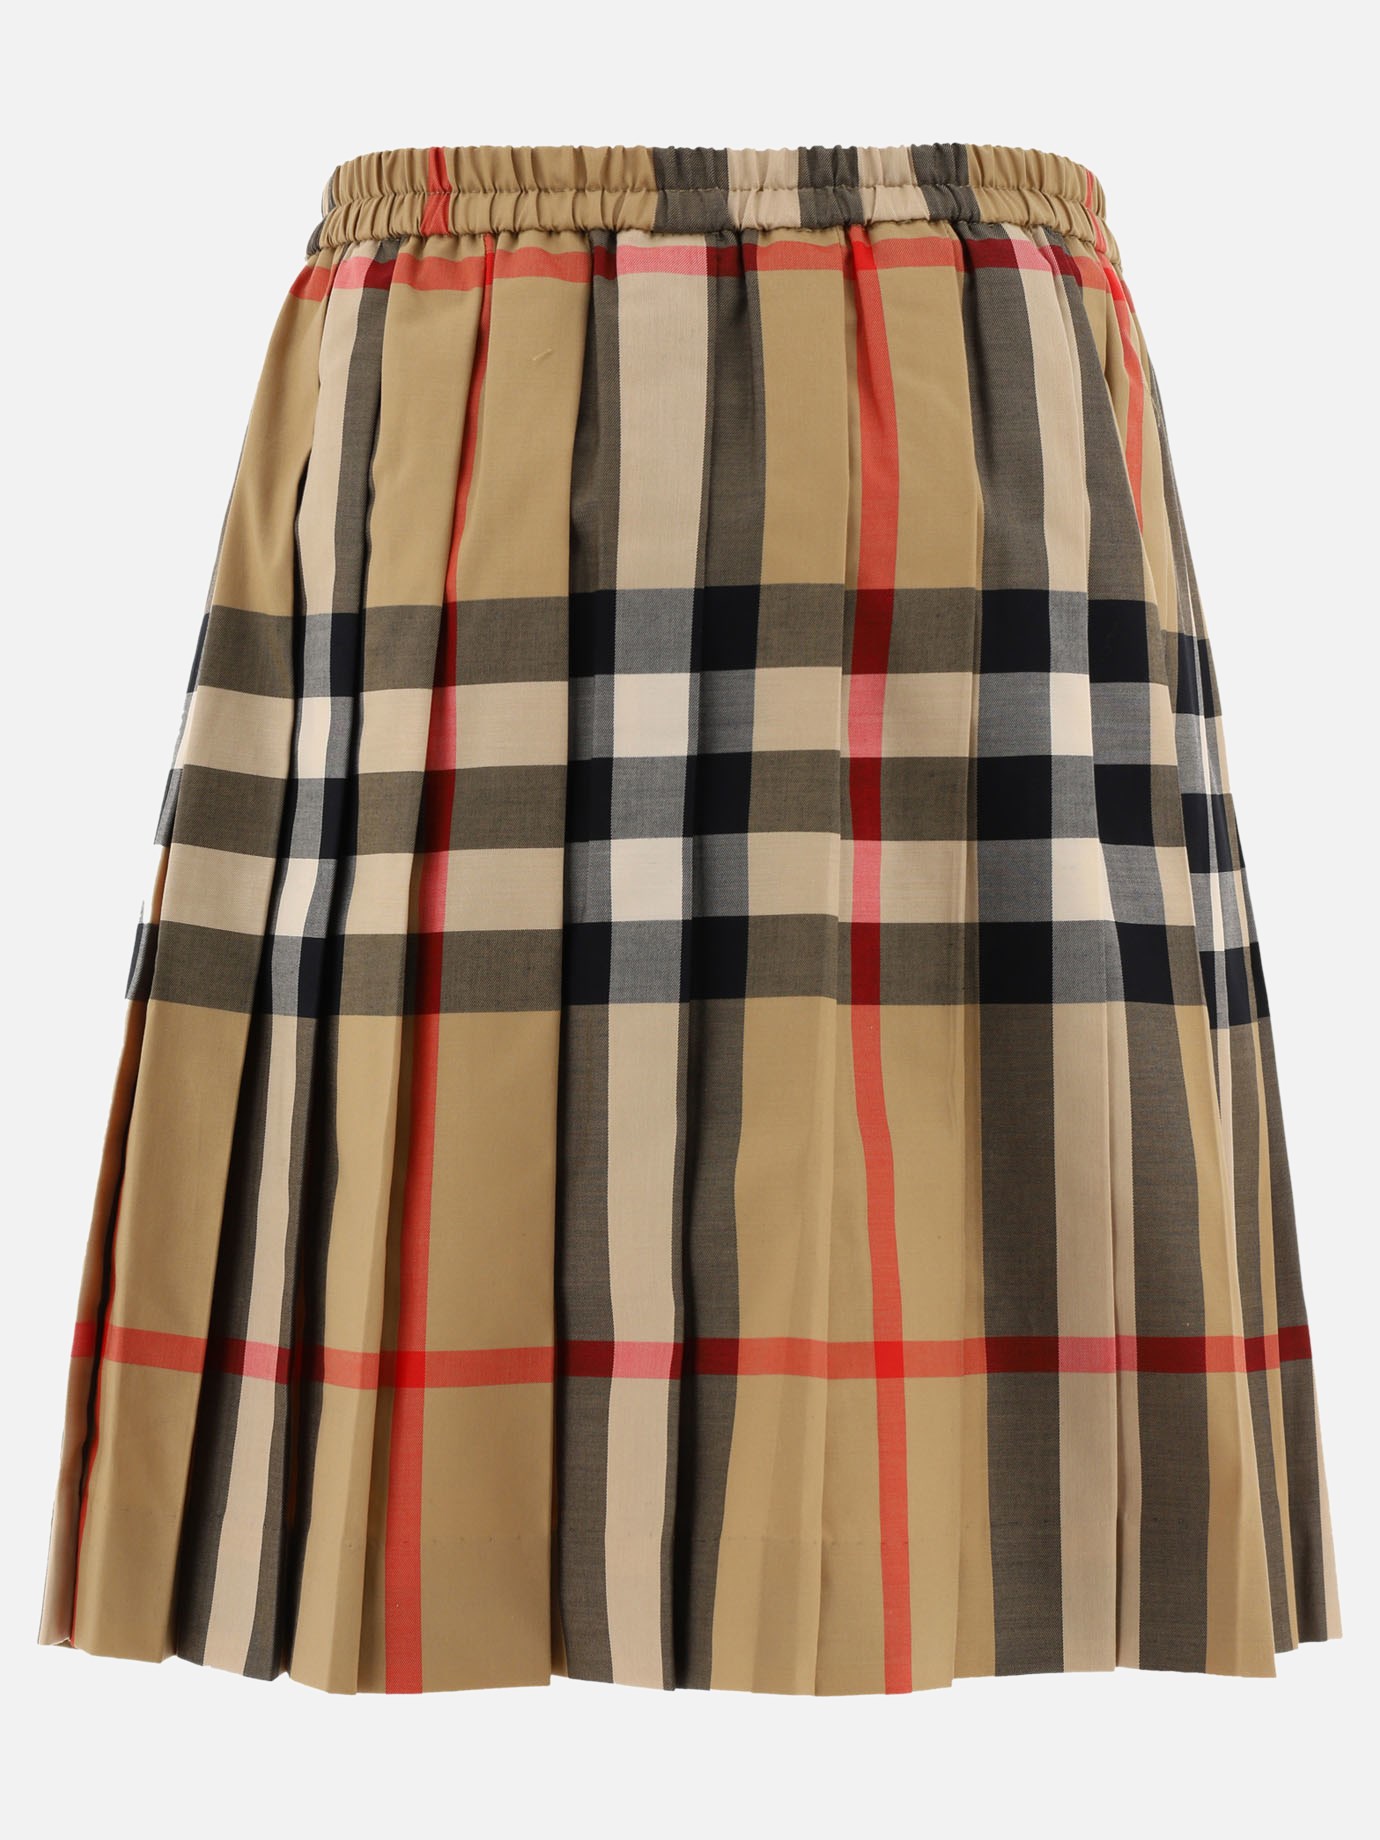  Hilde  pleated skirt by Burberry Kids